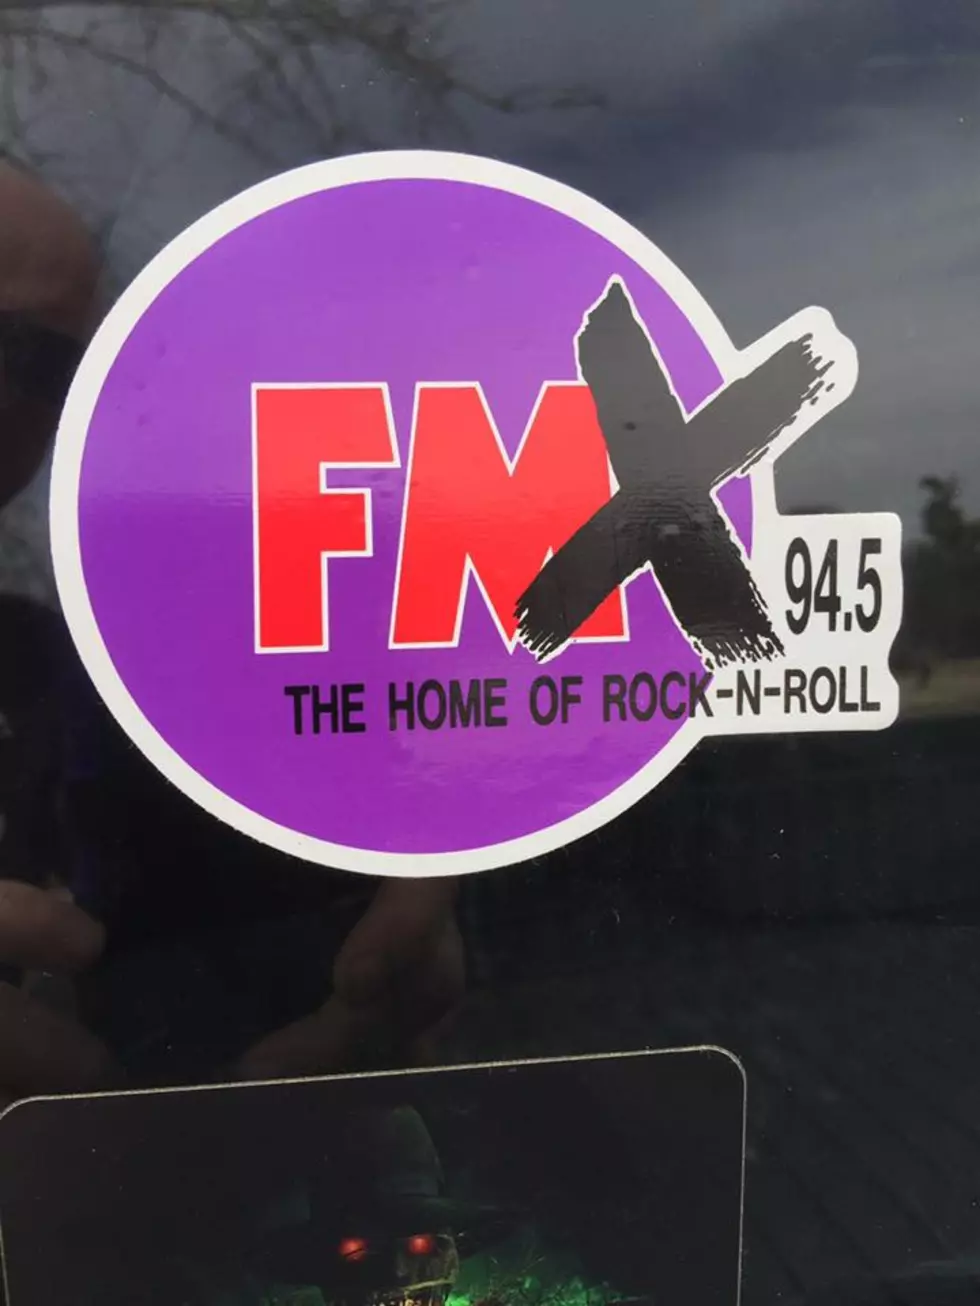 Can You Guess the Date On This FMX Sticker?